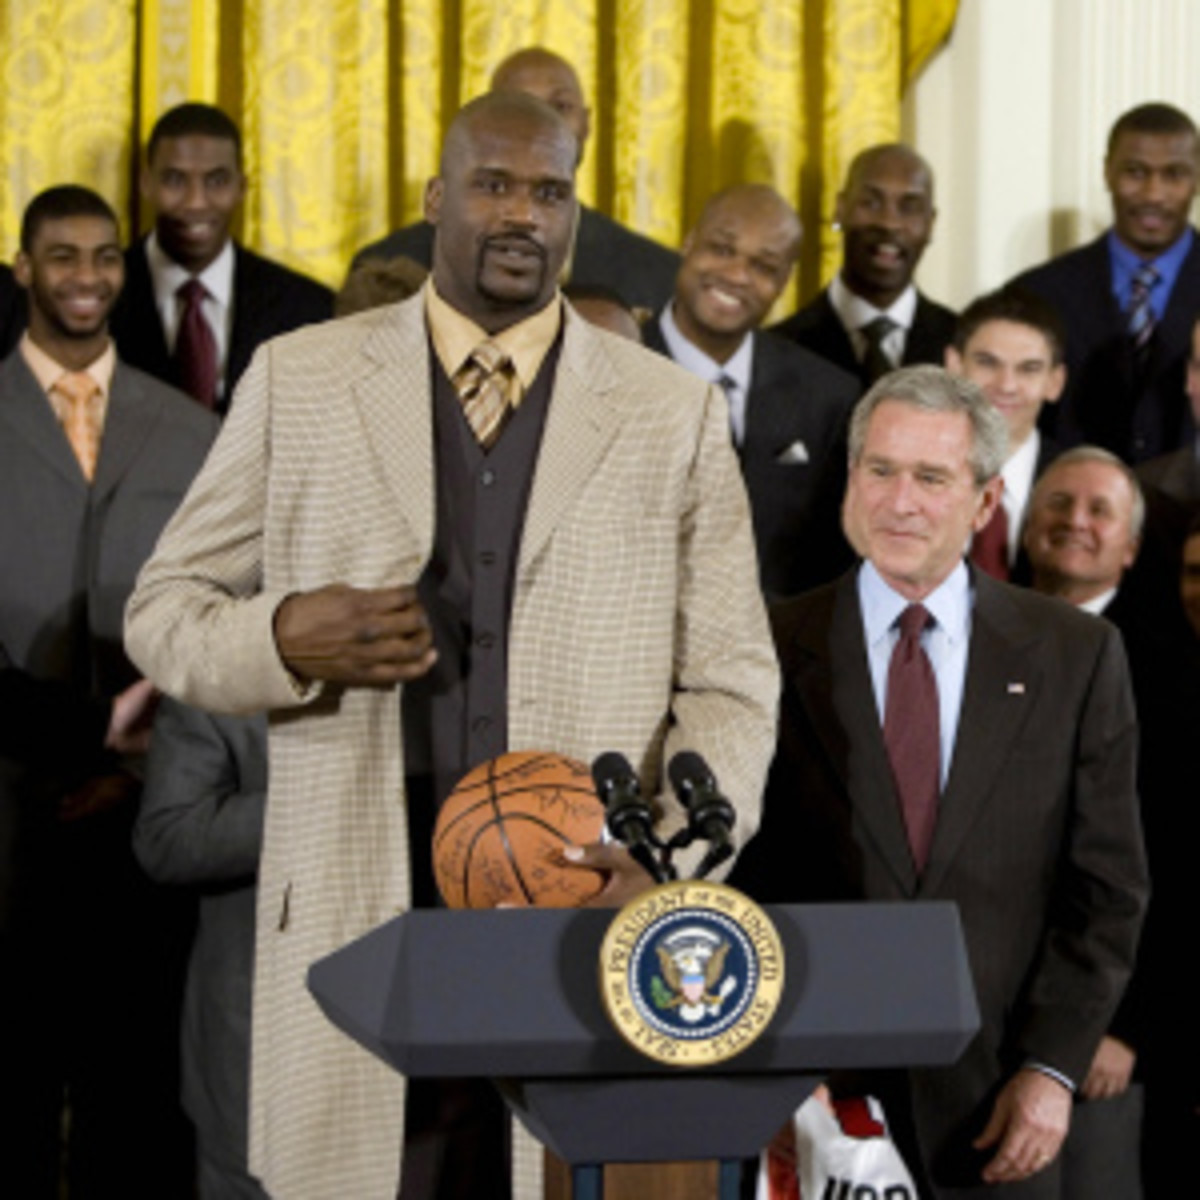 The Miami Heat visited The White House in 2007 and will go again on Monday. (Brendan Smialowski/Getty Images)